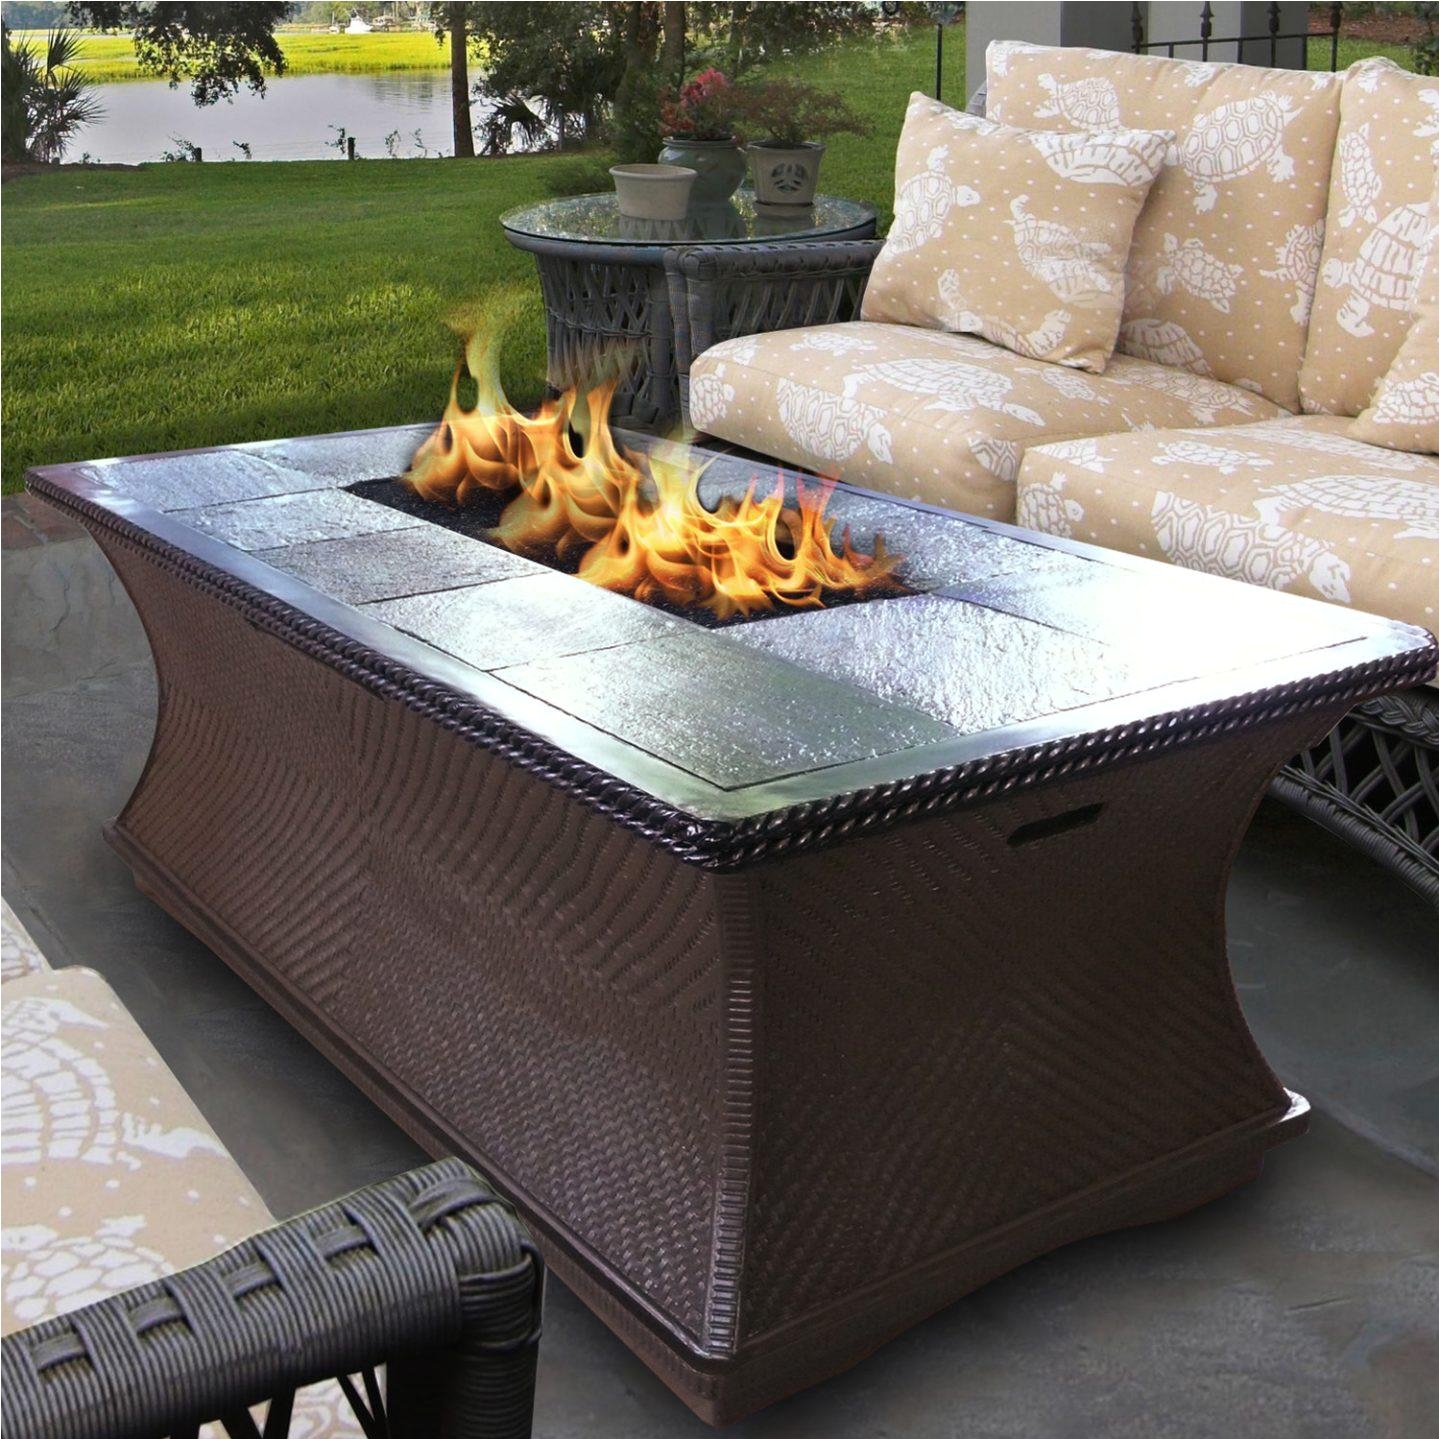 full size of home design diy gas fire pit table fresh 30 luxury outdoor metal large size of home design diy gas fire pit table fresh 30 luxury outdoor metal